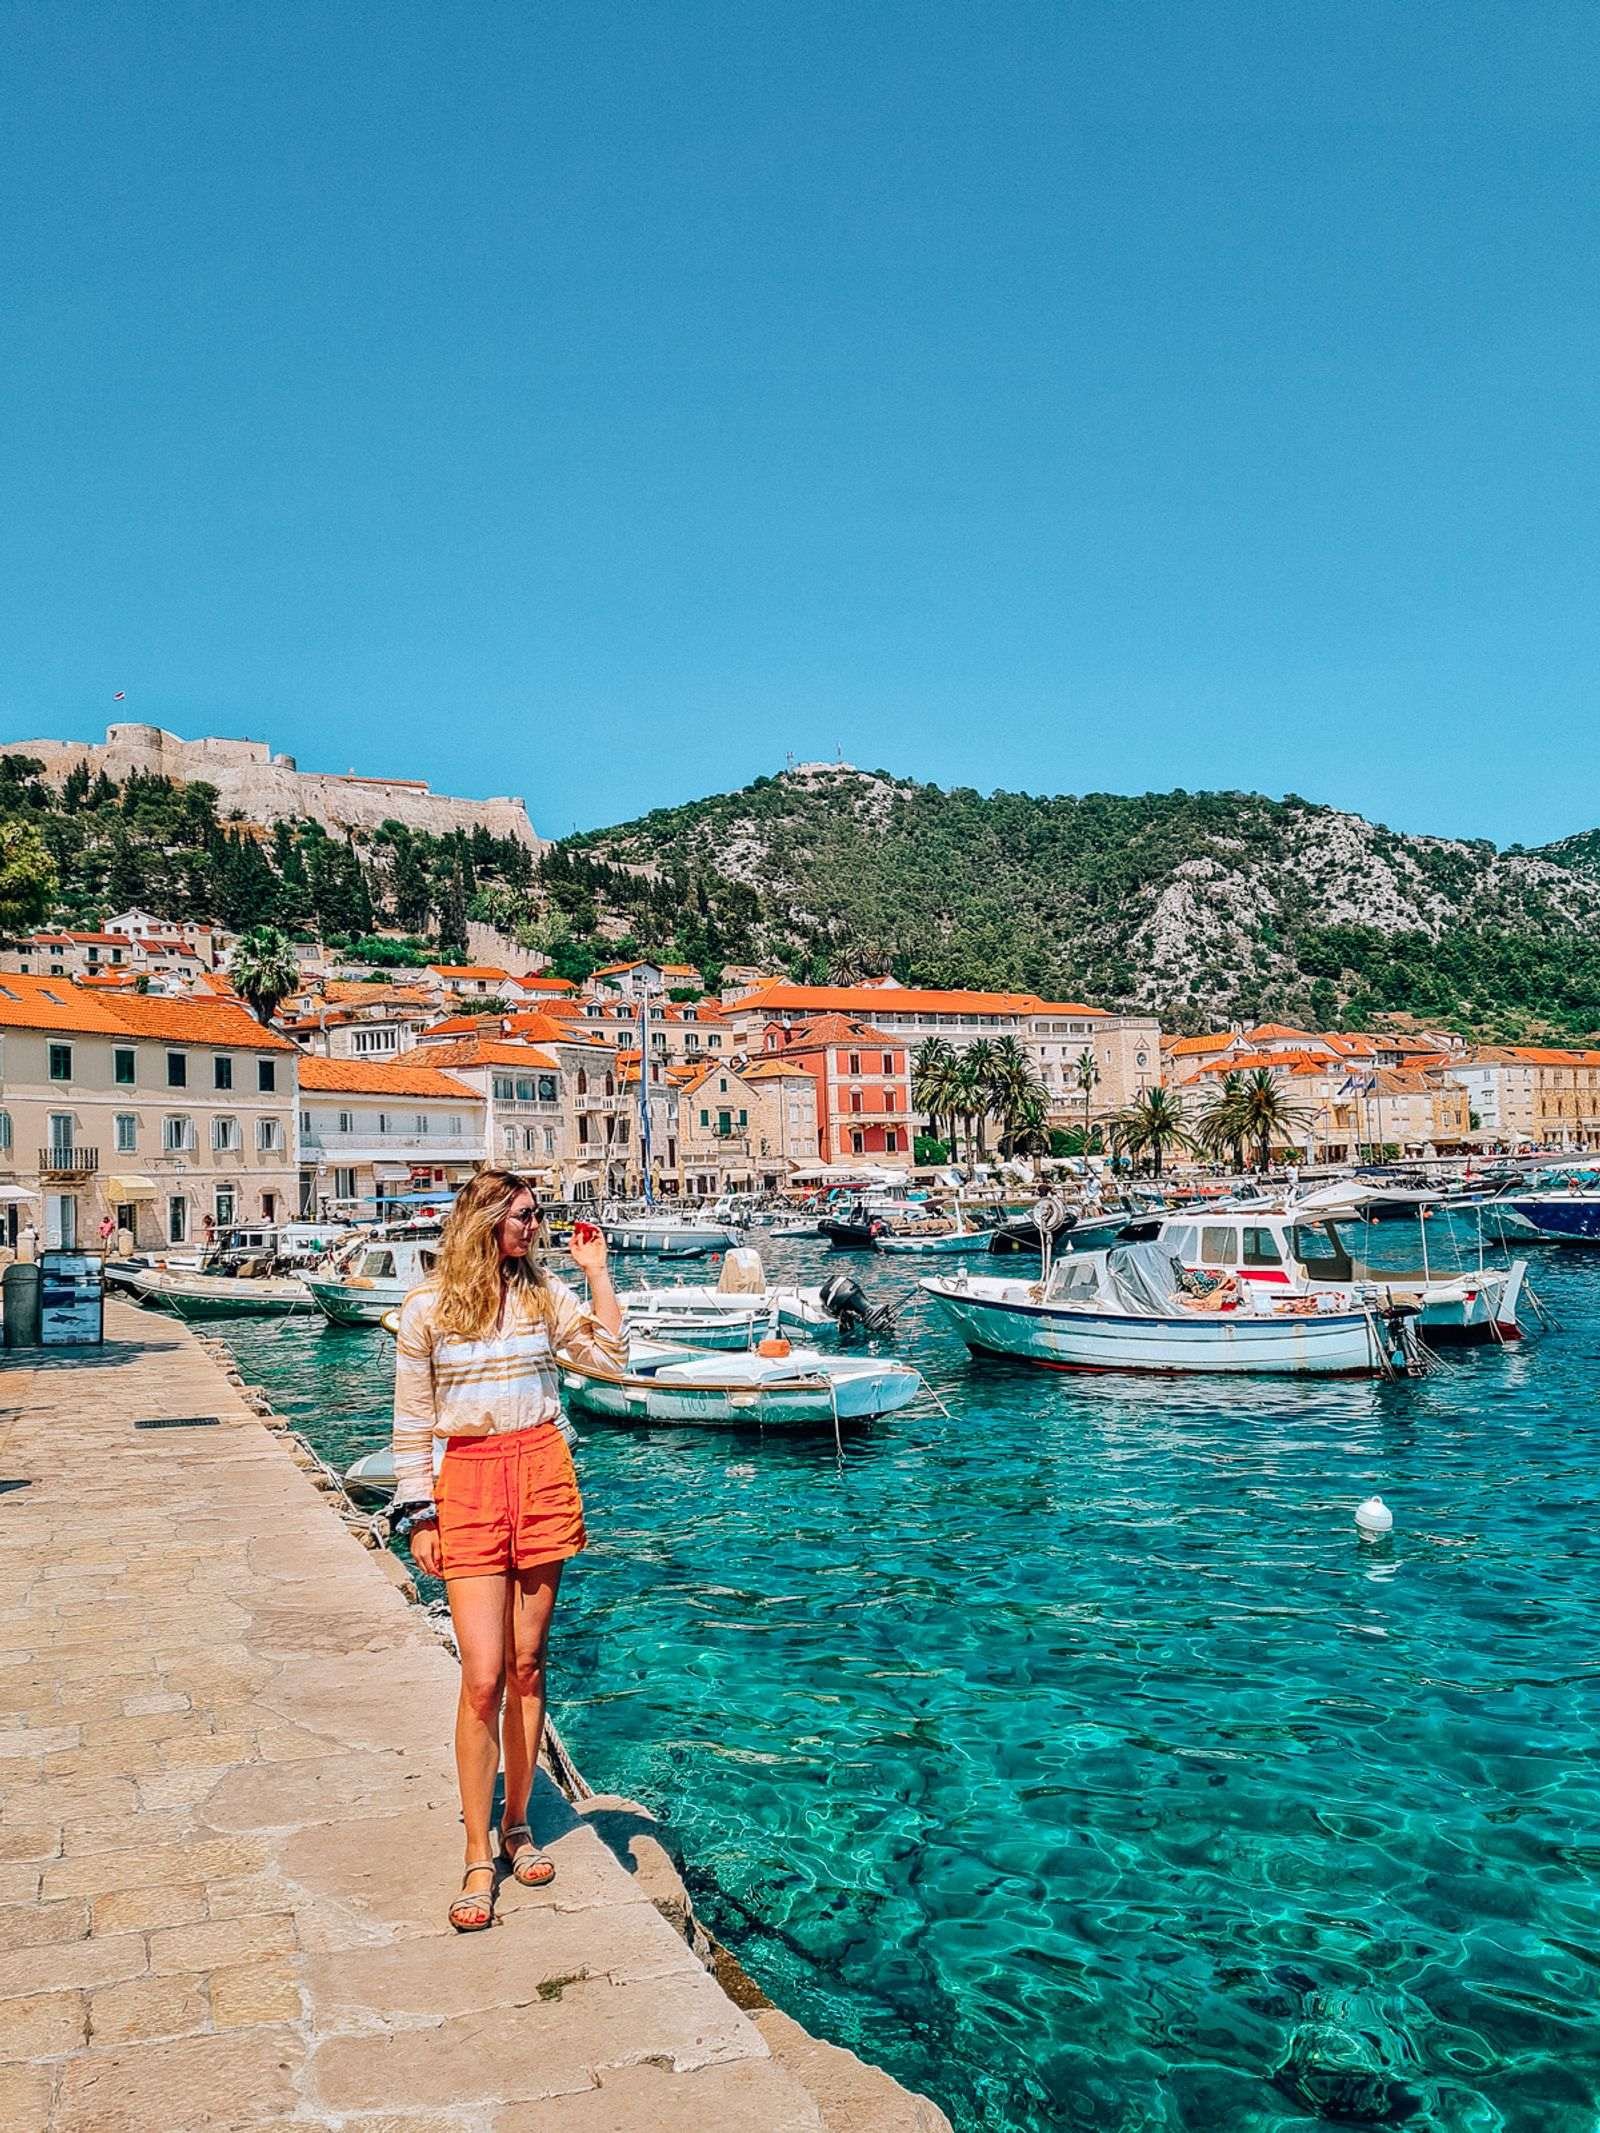 Woman in orange shorts and short standing on the waterfront with boats and the town behind her a fortress on the hill in Hvar